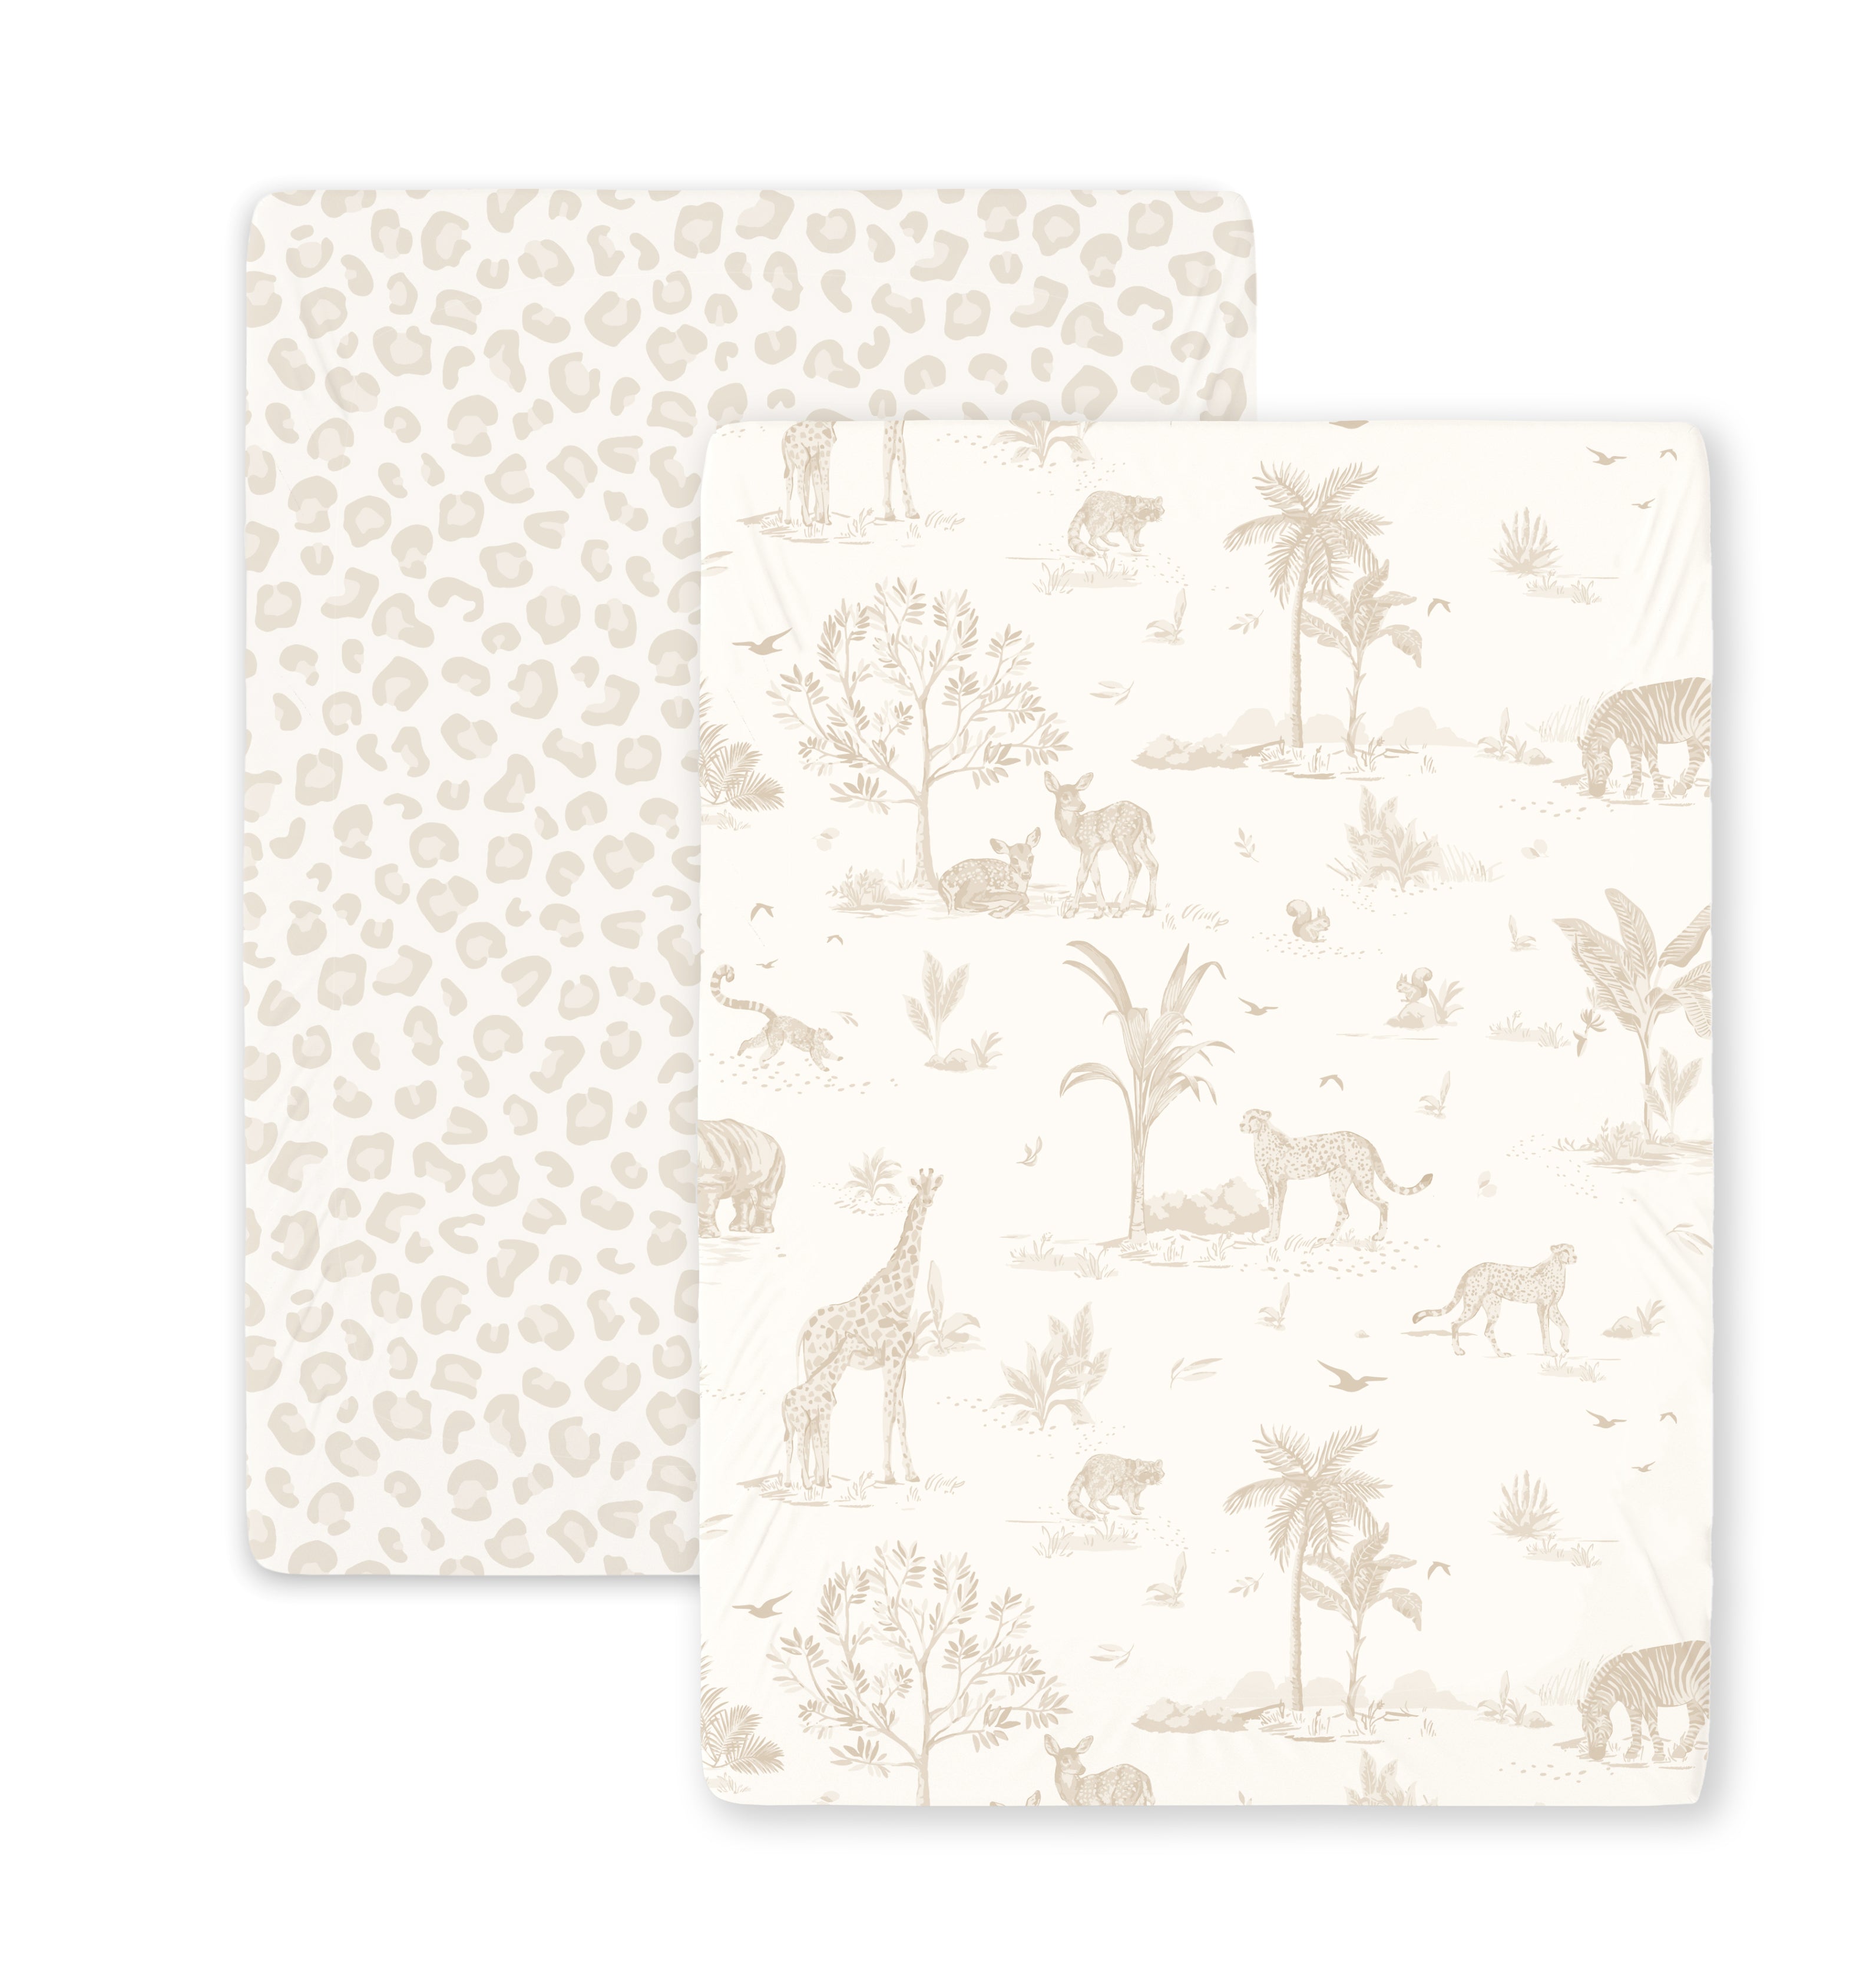 Two folded Mini Crib Fitted Sheet Sets - Safari & Wild by Makemake Organics; one features a leopard print pattern and the other displays a safari scene with various animals like giraffes and elephants.